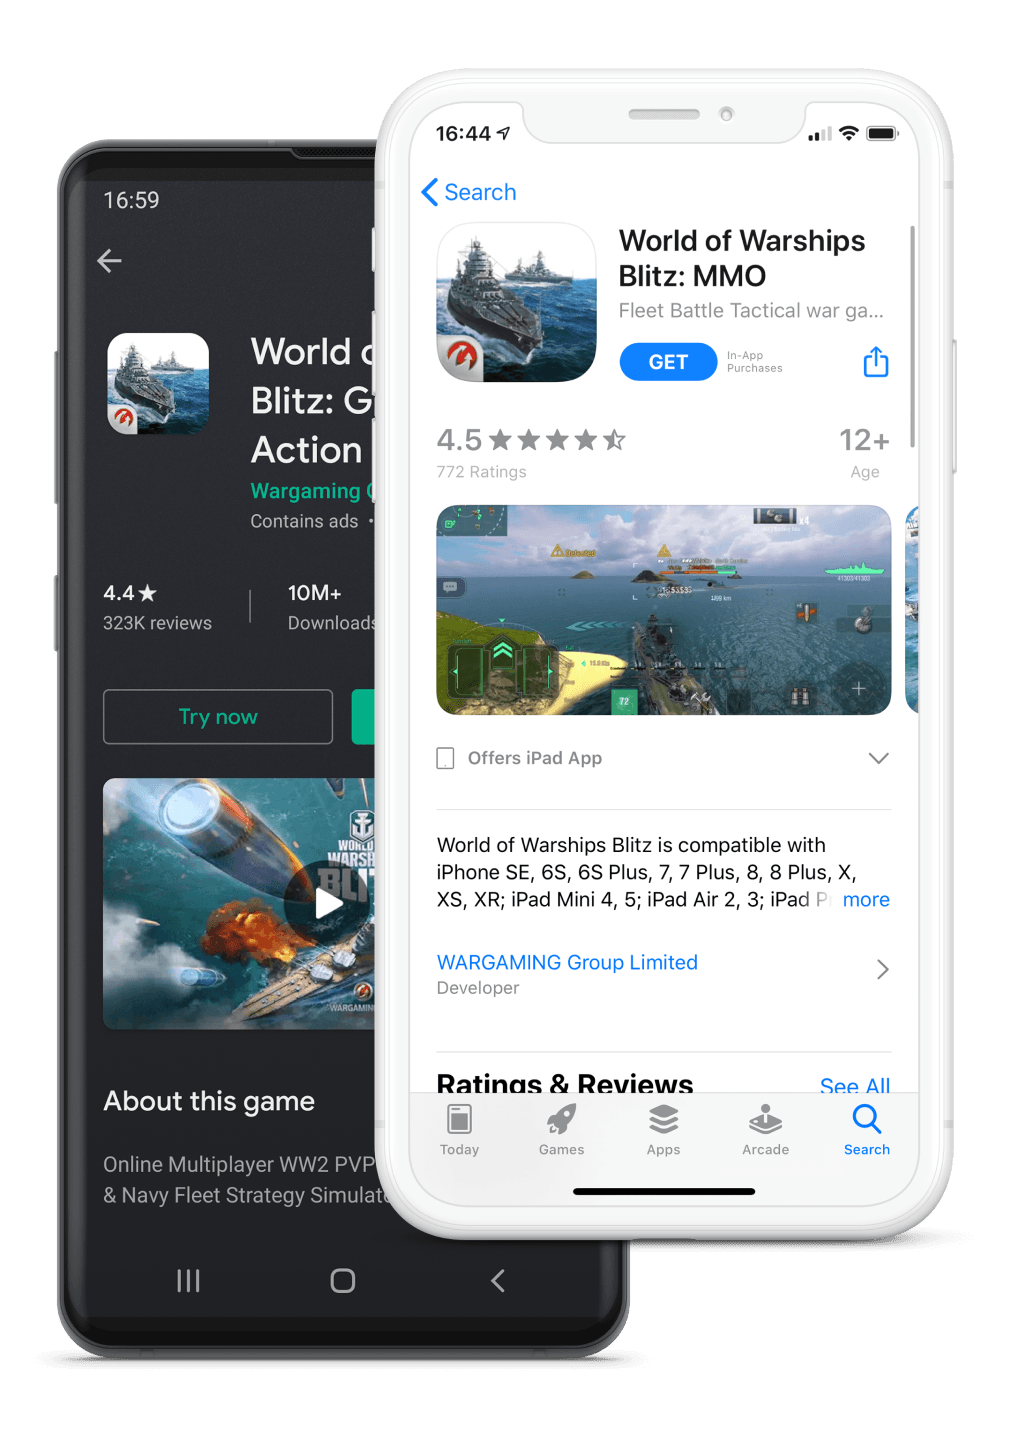 World of Warships Blitz Drives Up App Impressions by more than 35%